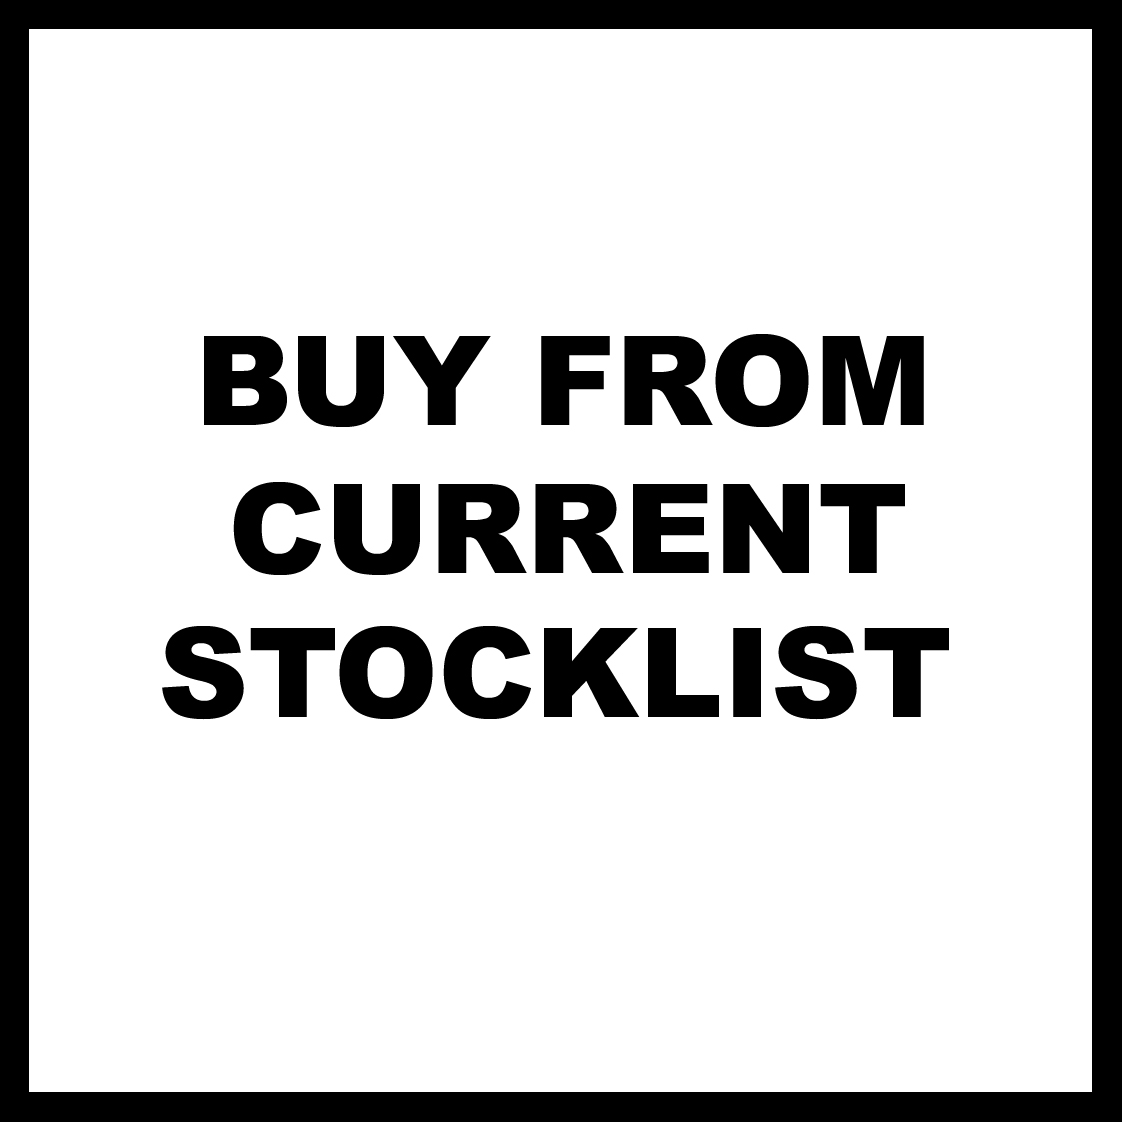 BUY FROM CURRENT STOCKLIST